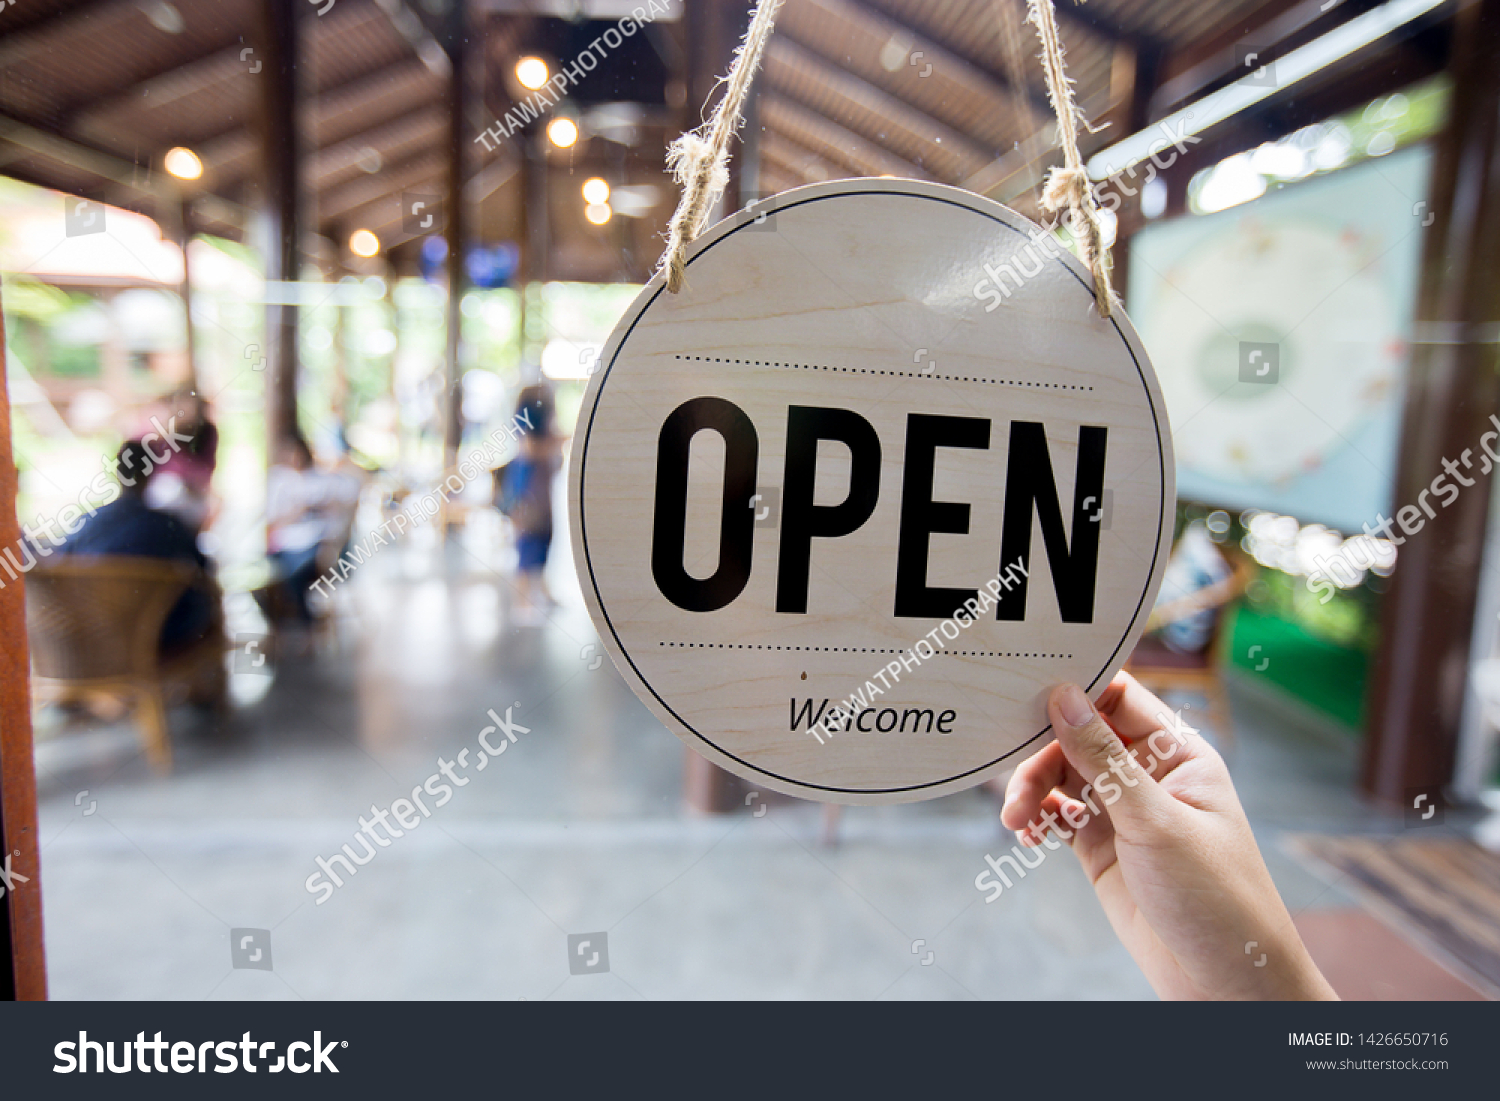 Open sign in coffee shop, Working in cafe. #1426650716